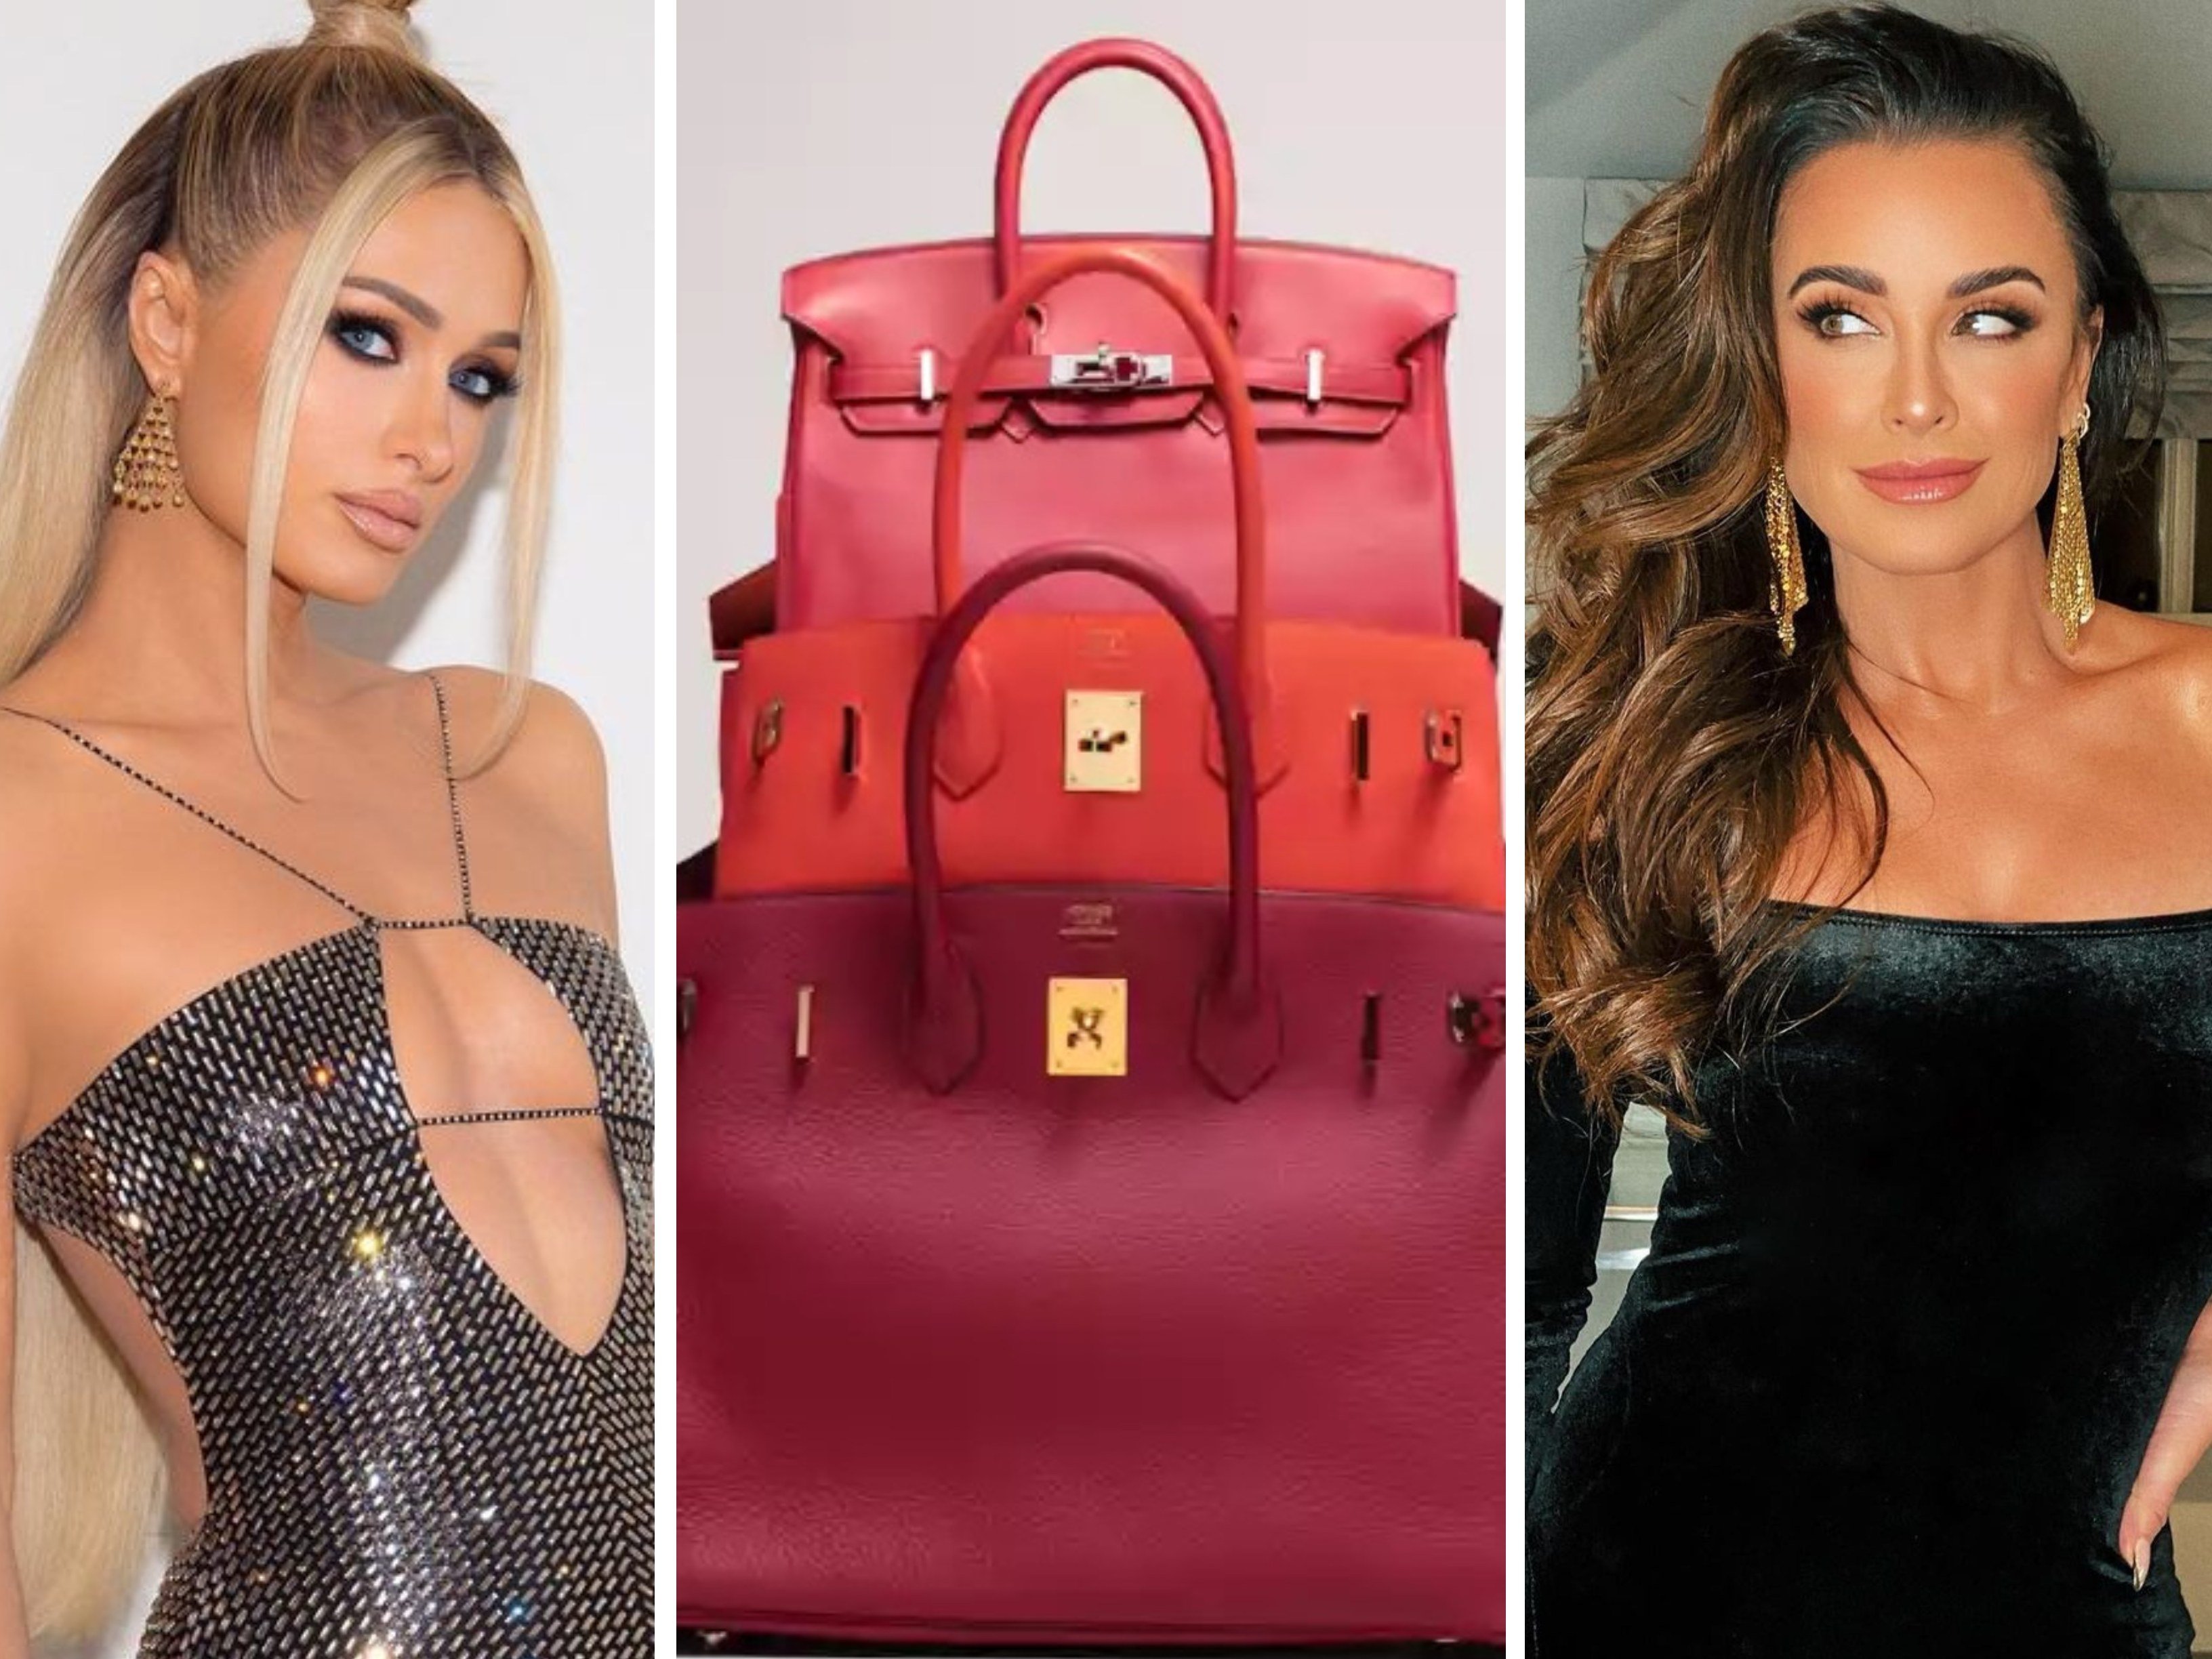 Must Read: Birkin Bag Sets Absurd Record Price at Auction, Thieves